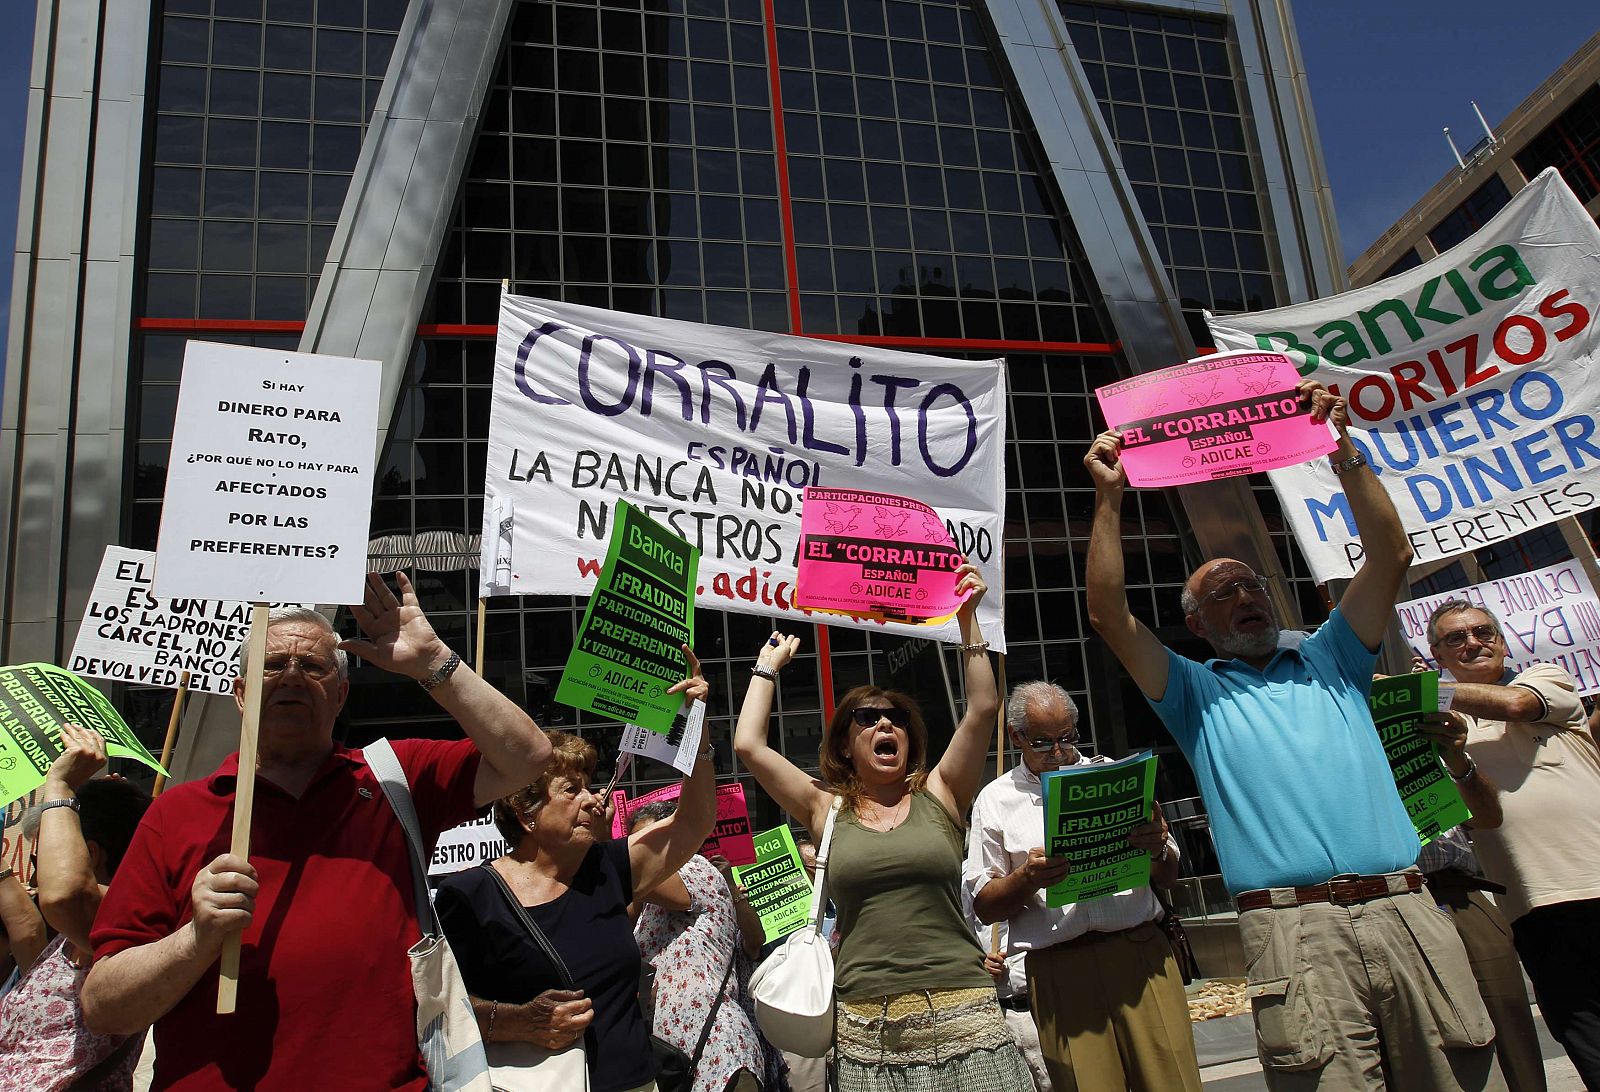 Minority shareholders hold signs as they protest against the abuses of banks and saving banks in front of the headquarters of Spain's lender bank Bankia in Madrid